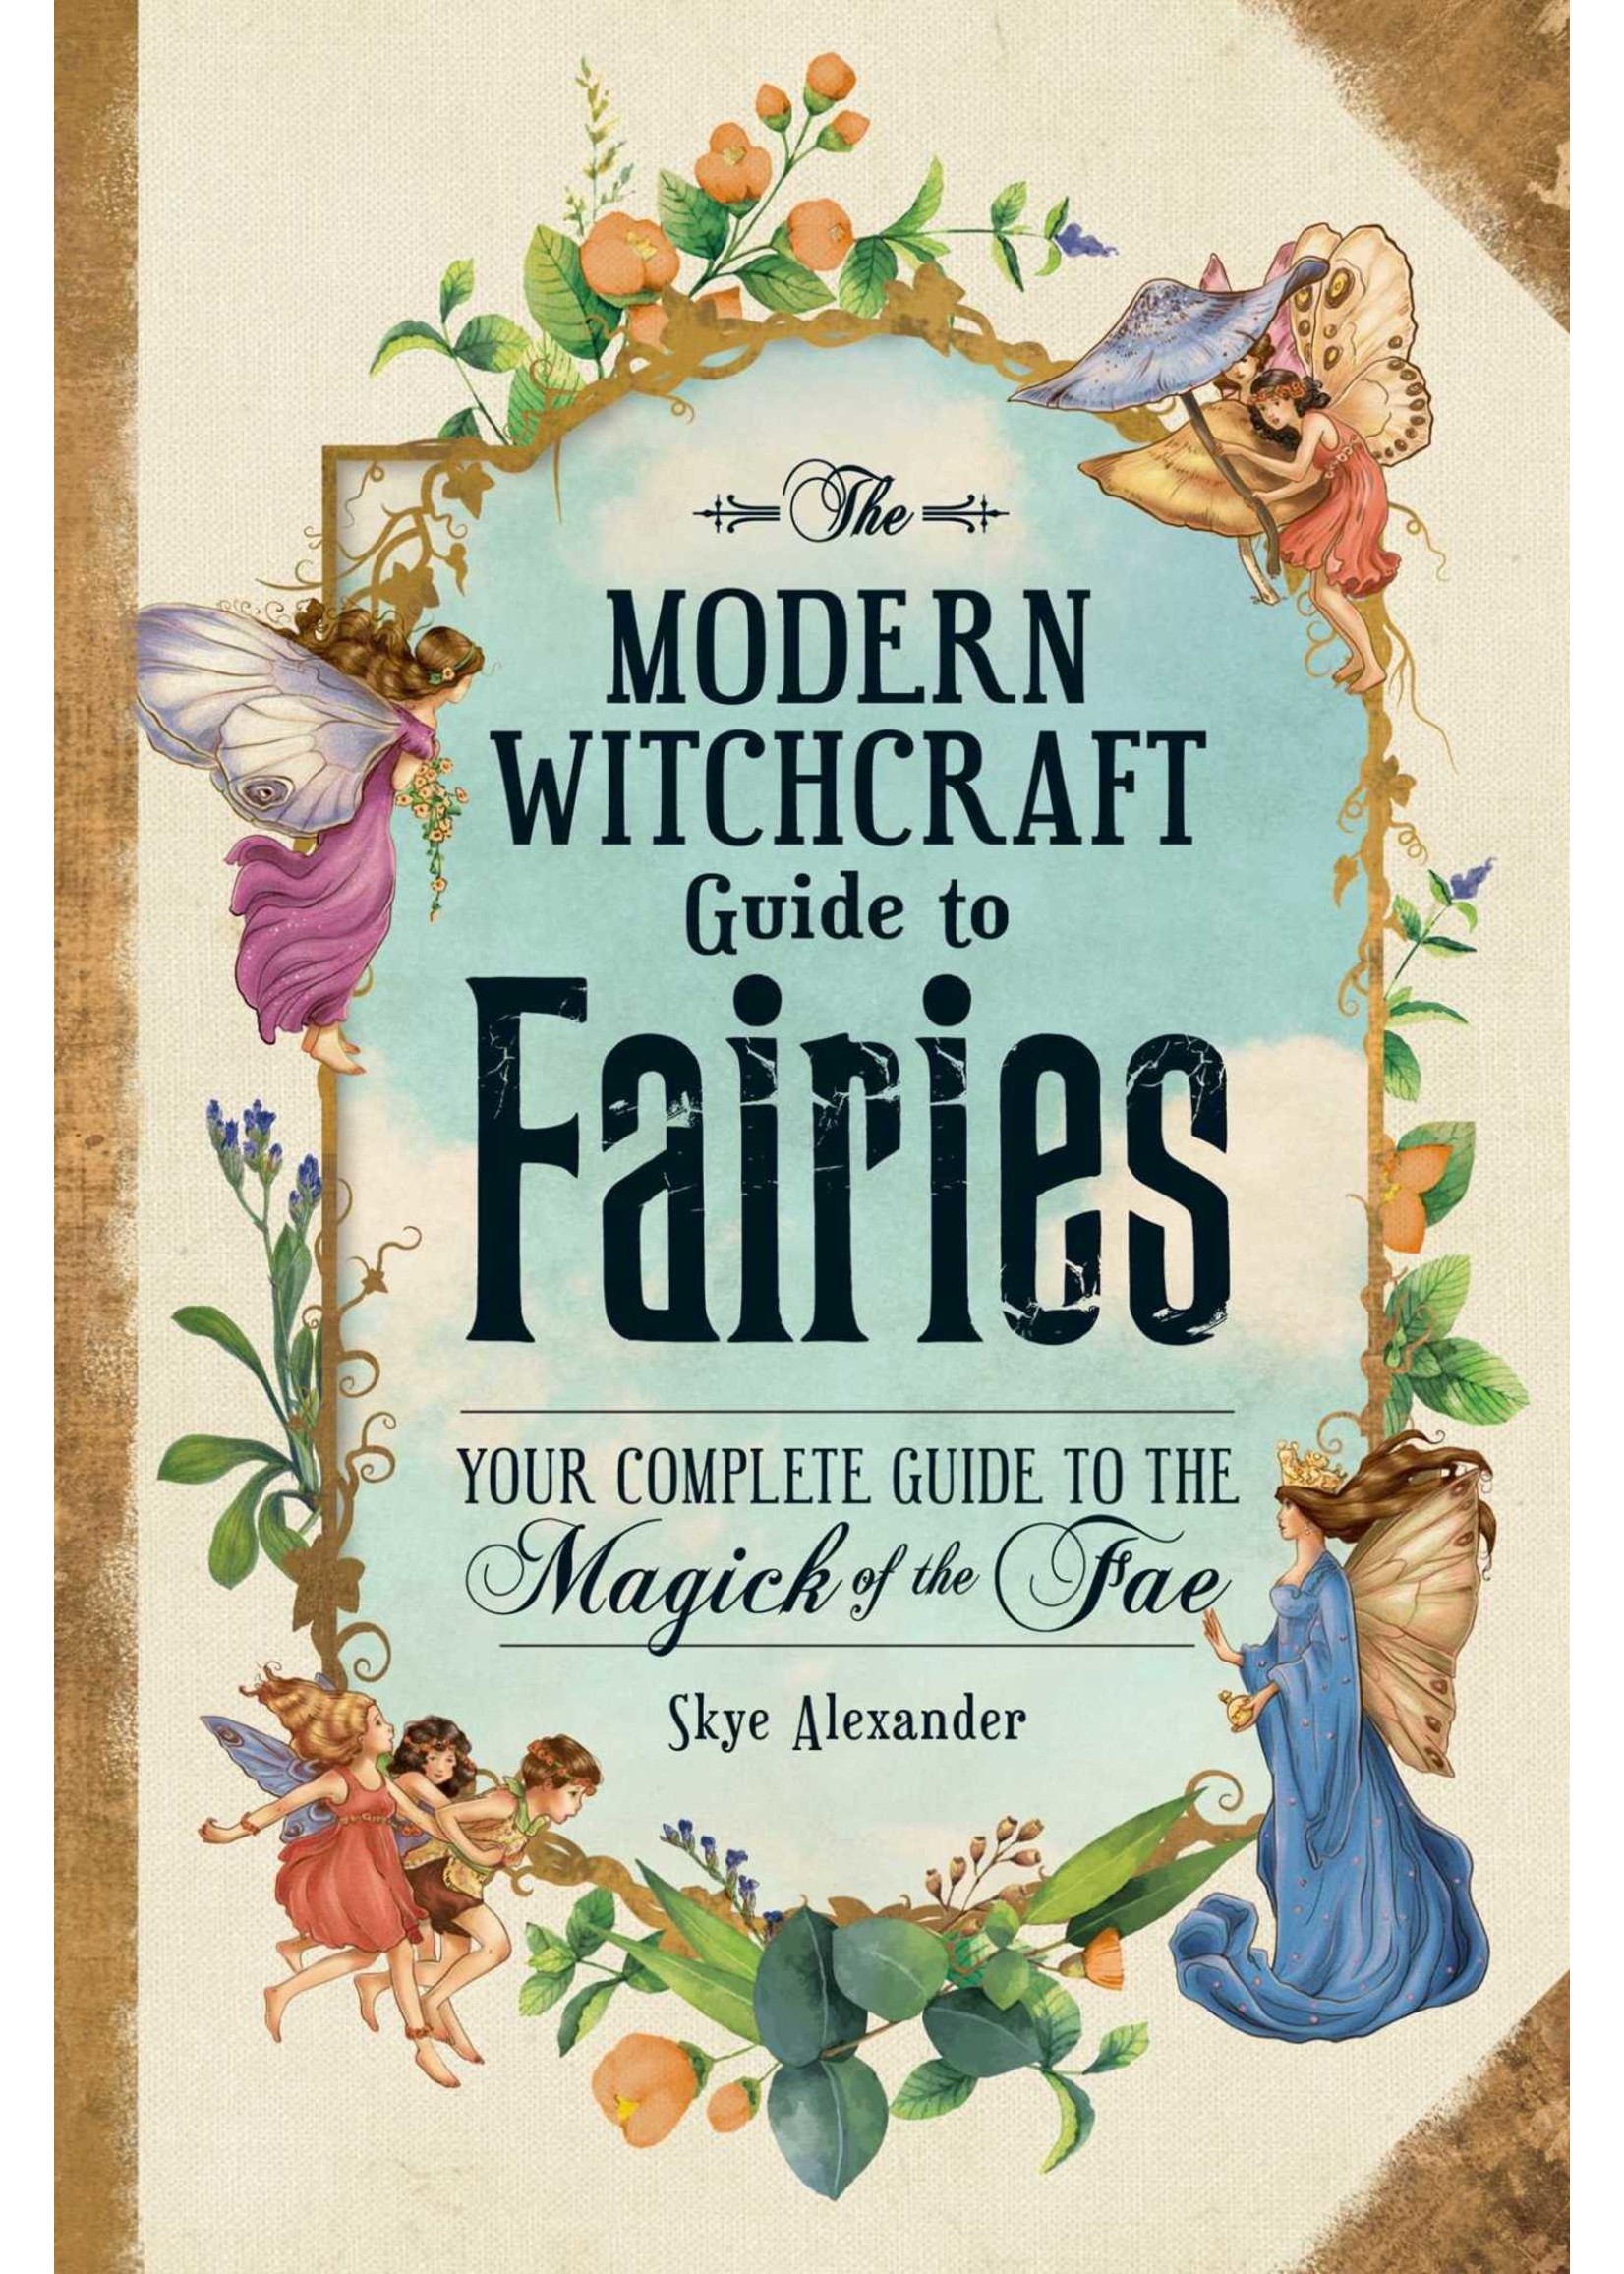 The Modern Witchcraft Guide to Fairies: Your Complete Guide to the Magick of the Fae by Skye Alexander